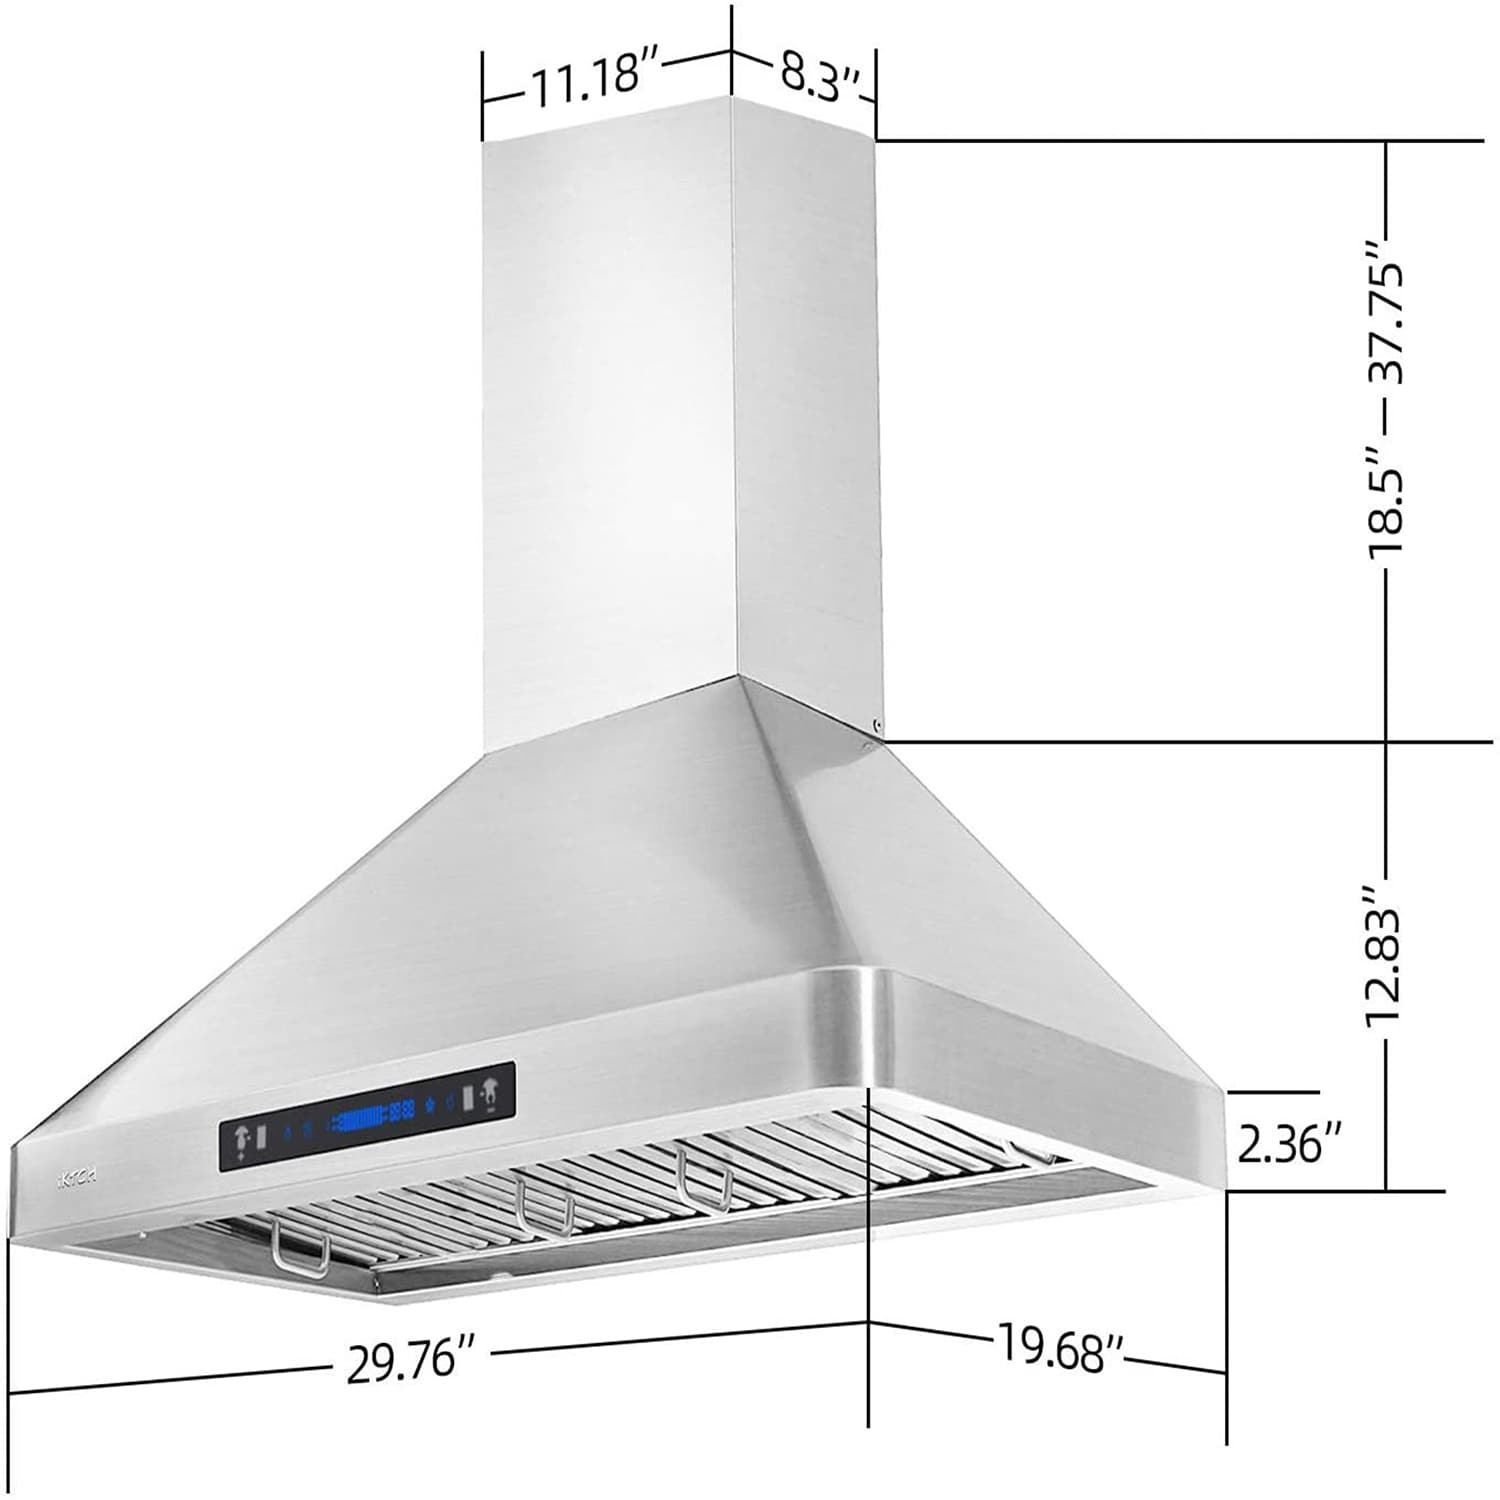 IKTCH 30-in 900-CFM Ducted Stainless Steel Wall-Mounted Range Hood with Charcoal Filter | P02R30